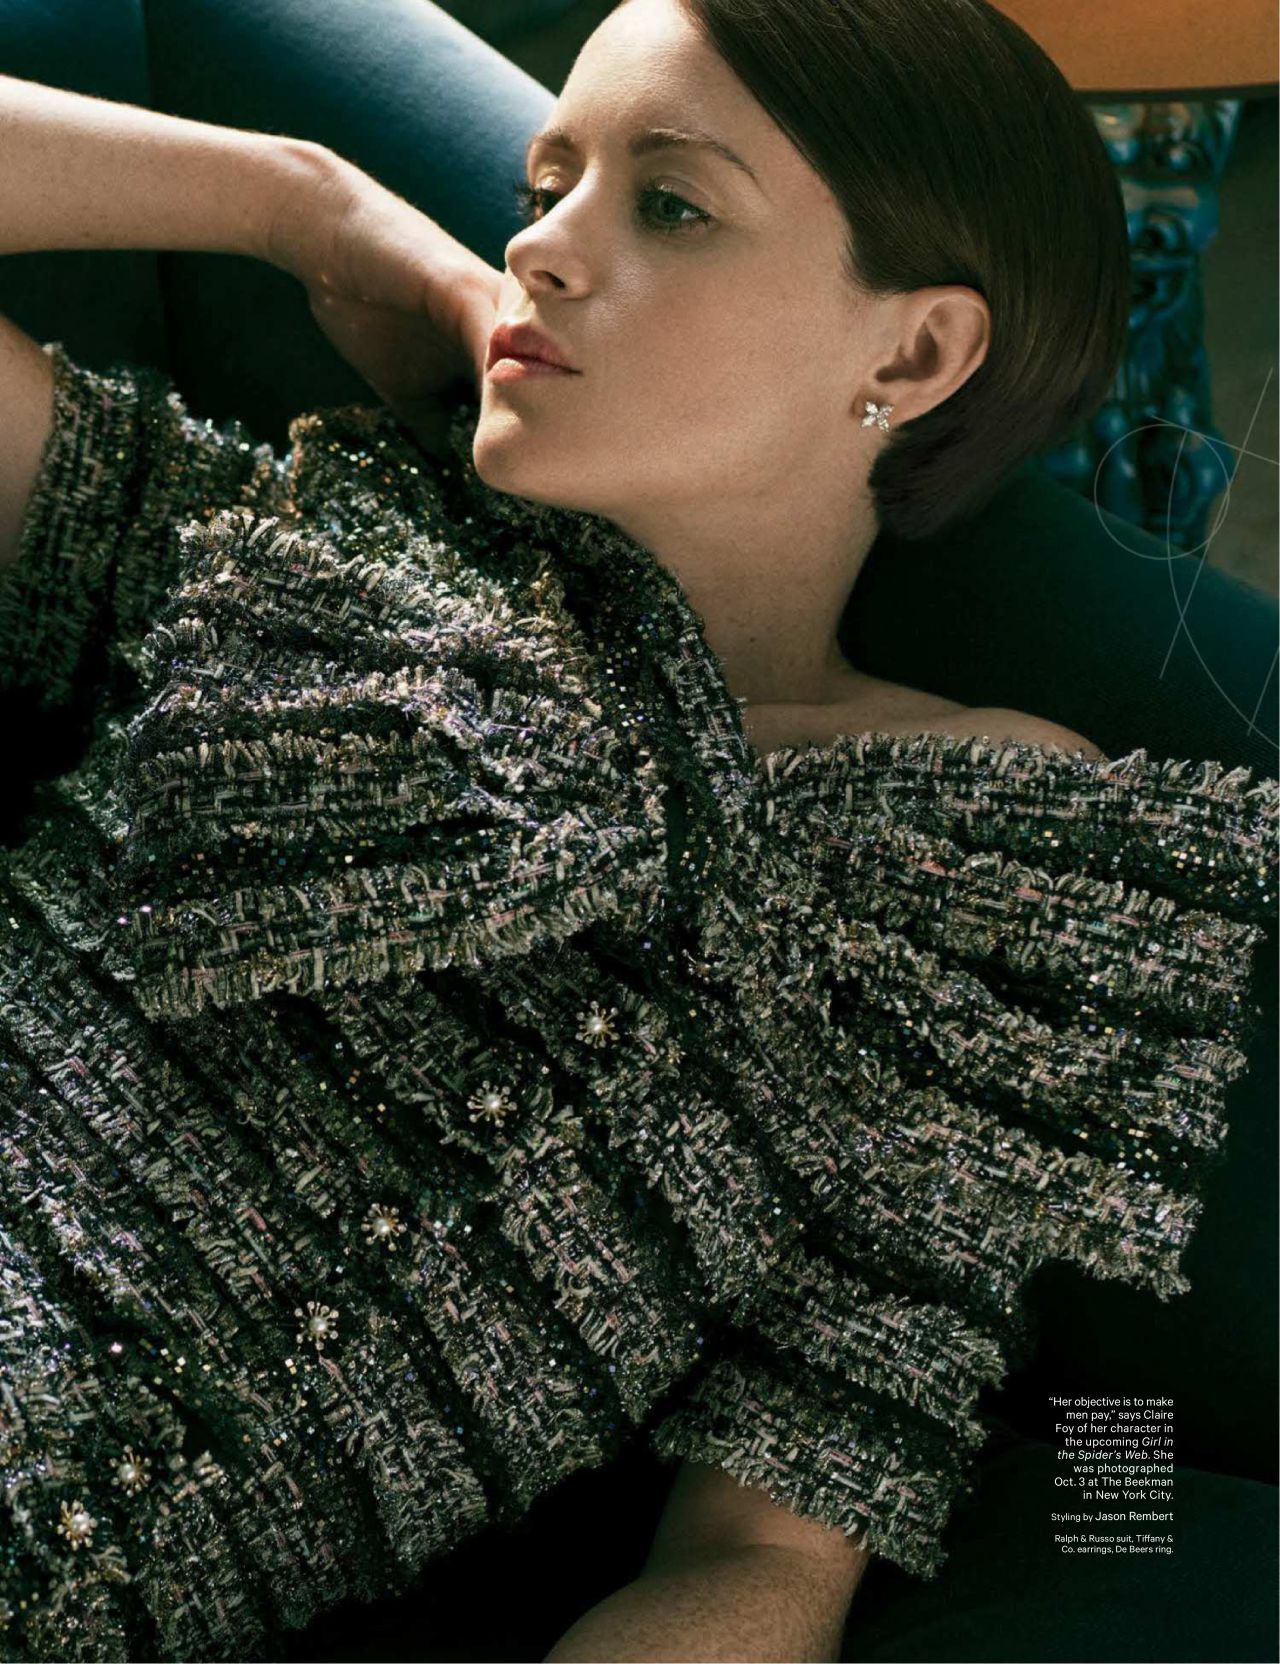 https://celebmafia.com/wp-content/uploads/2018/10/claire-foy-the-hollywood-reporter-october-2018-issue-8.jpg